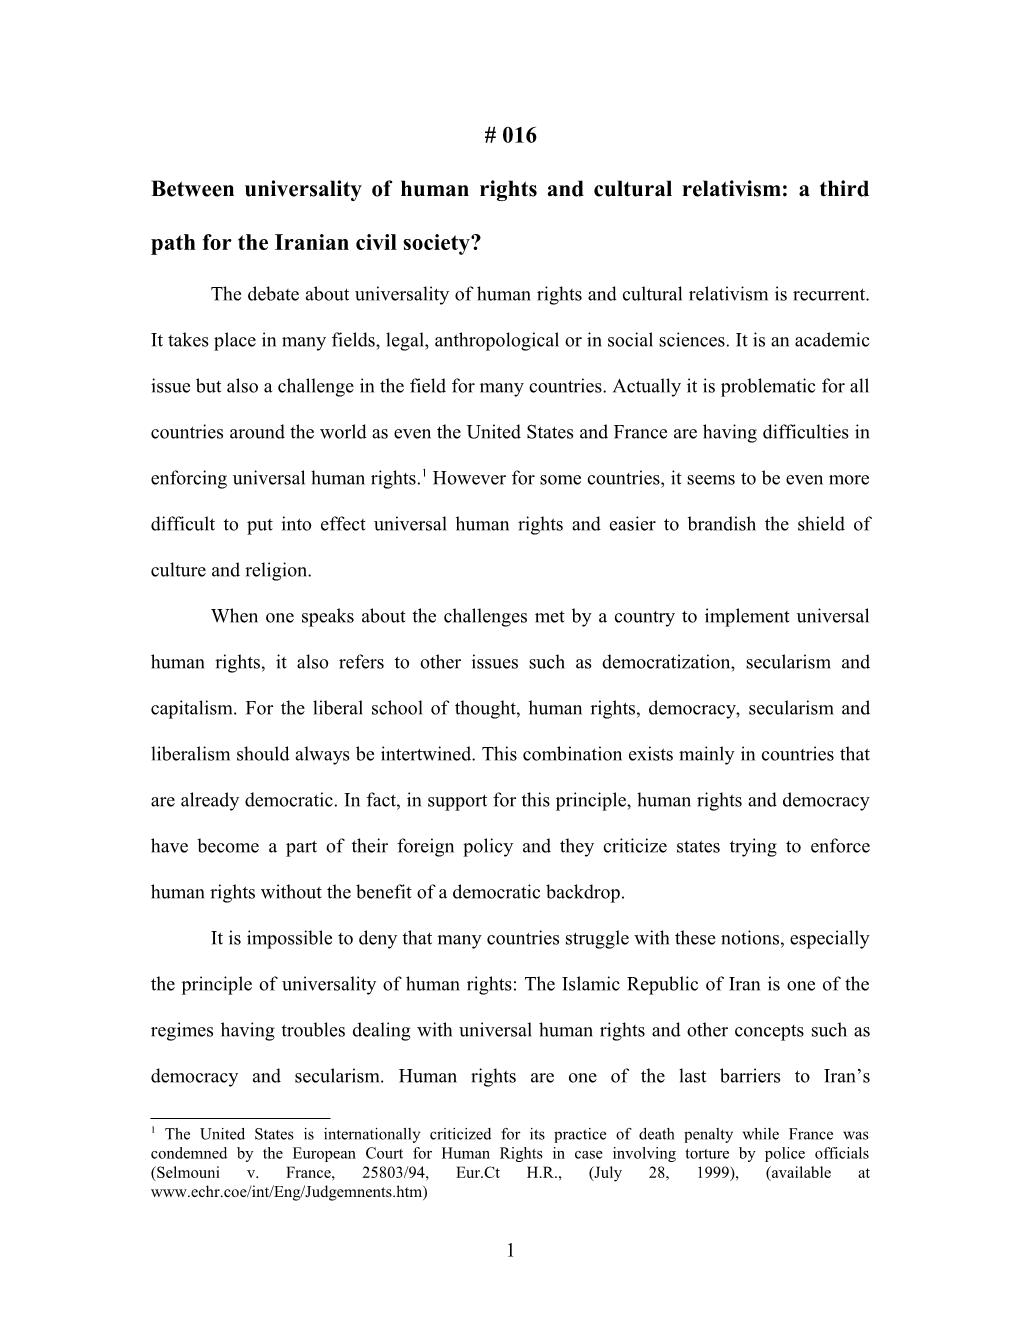 The Iranian Civil Society and Universality of Human Rights: a Third Path